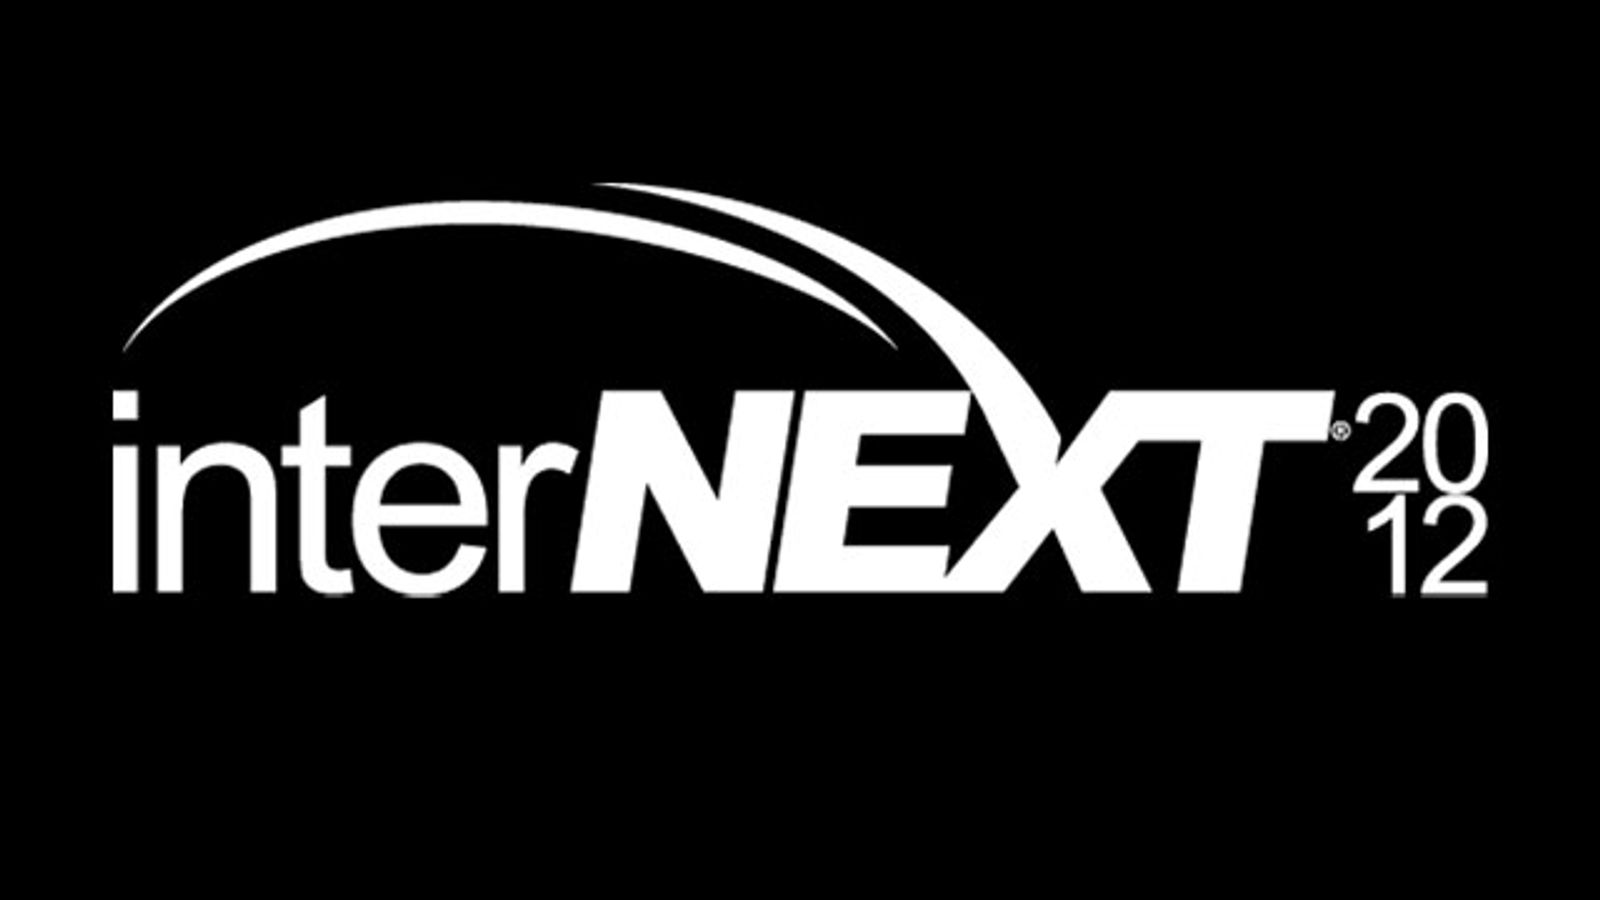 Opening Night Internext Party Set for Sunday at Hustler Club